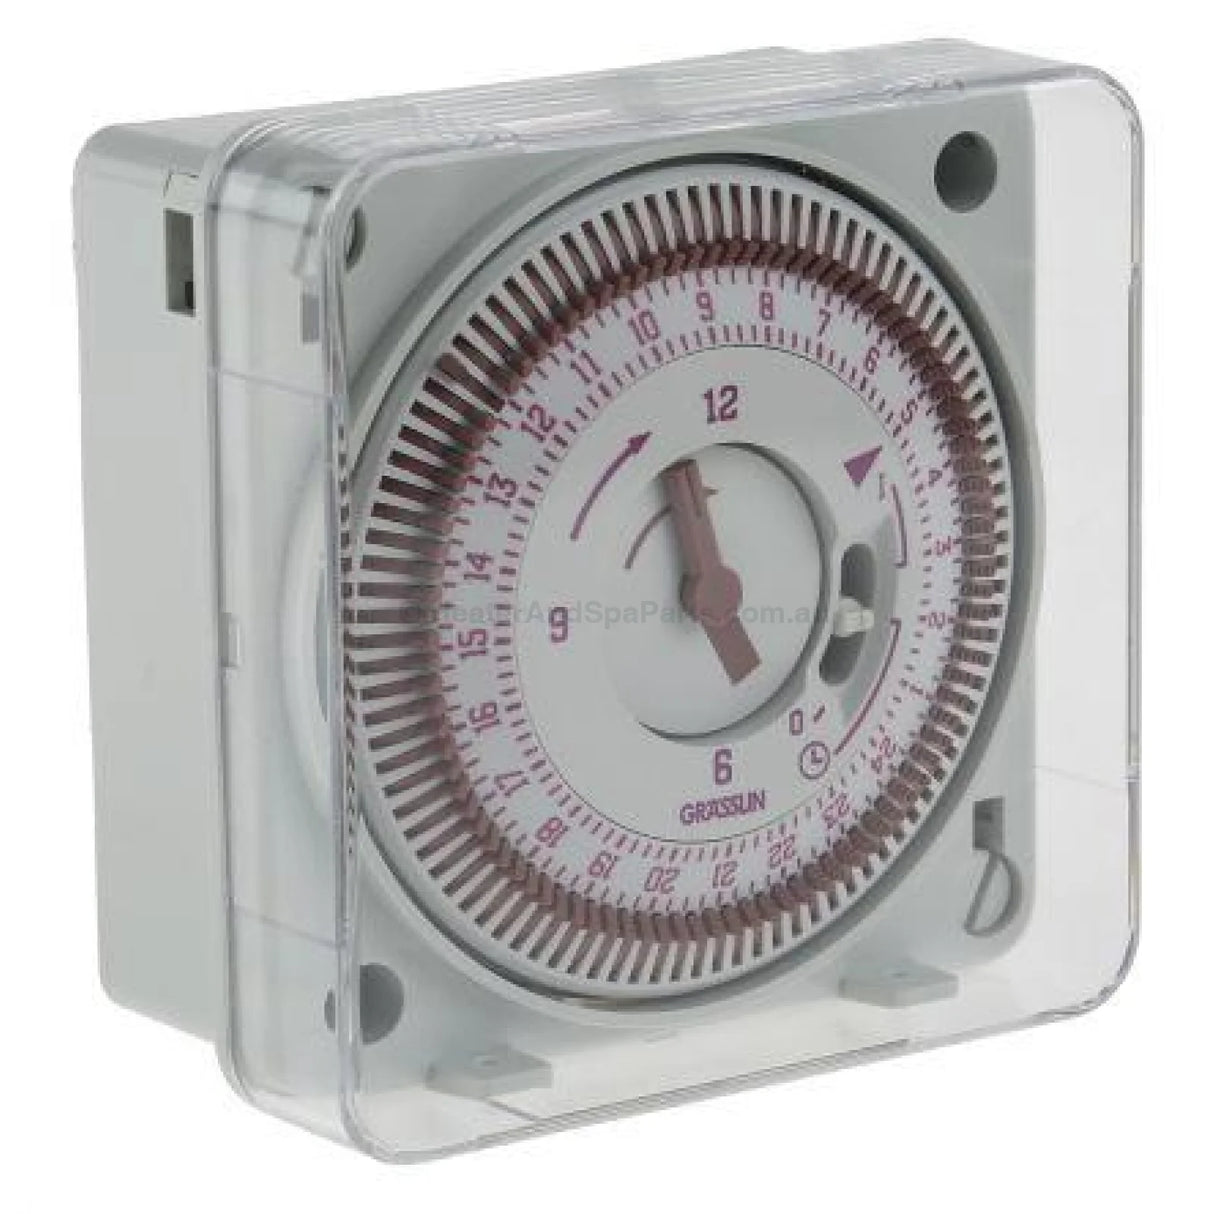 Grasslin Time Clock for Controllers / Air Switches / Chlorinators and more - Analogue - Heater and Spa Parts